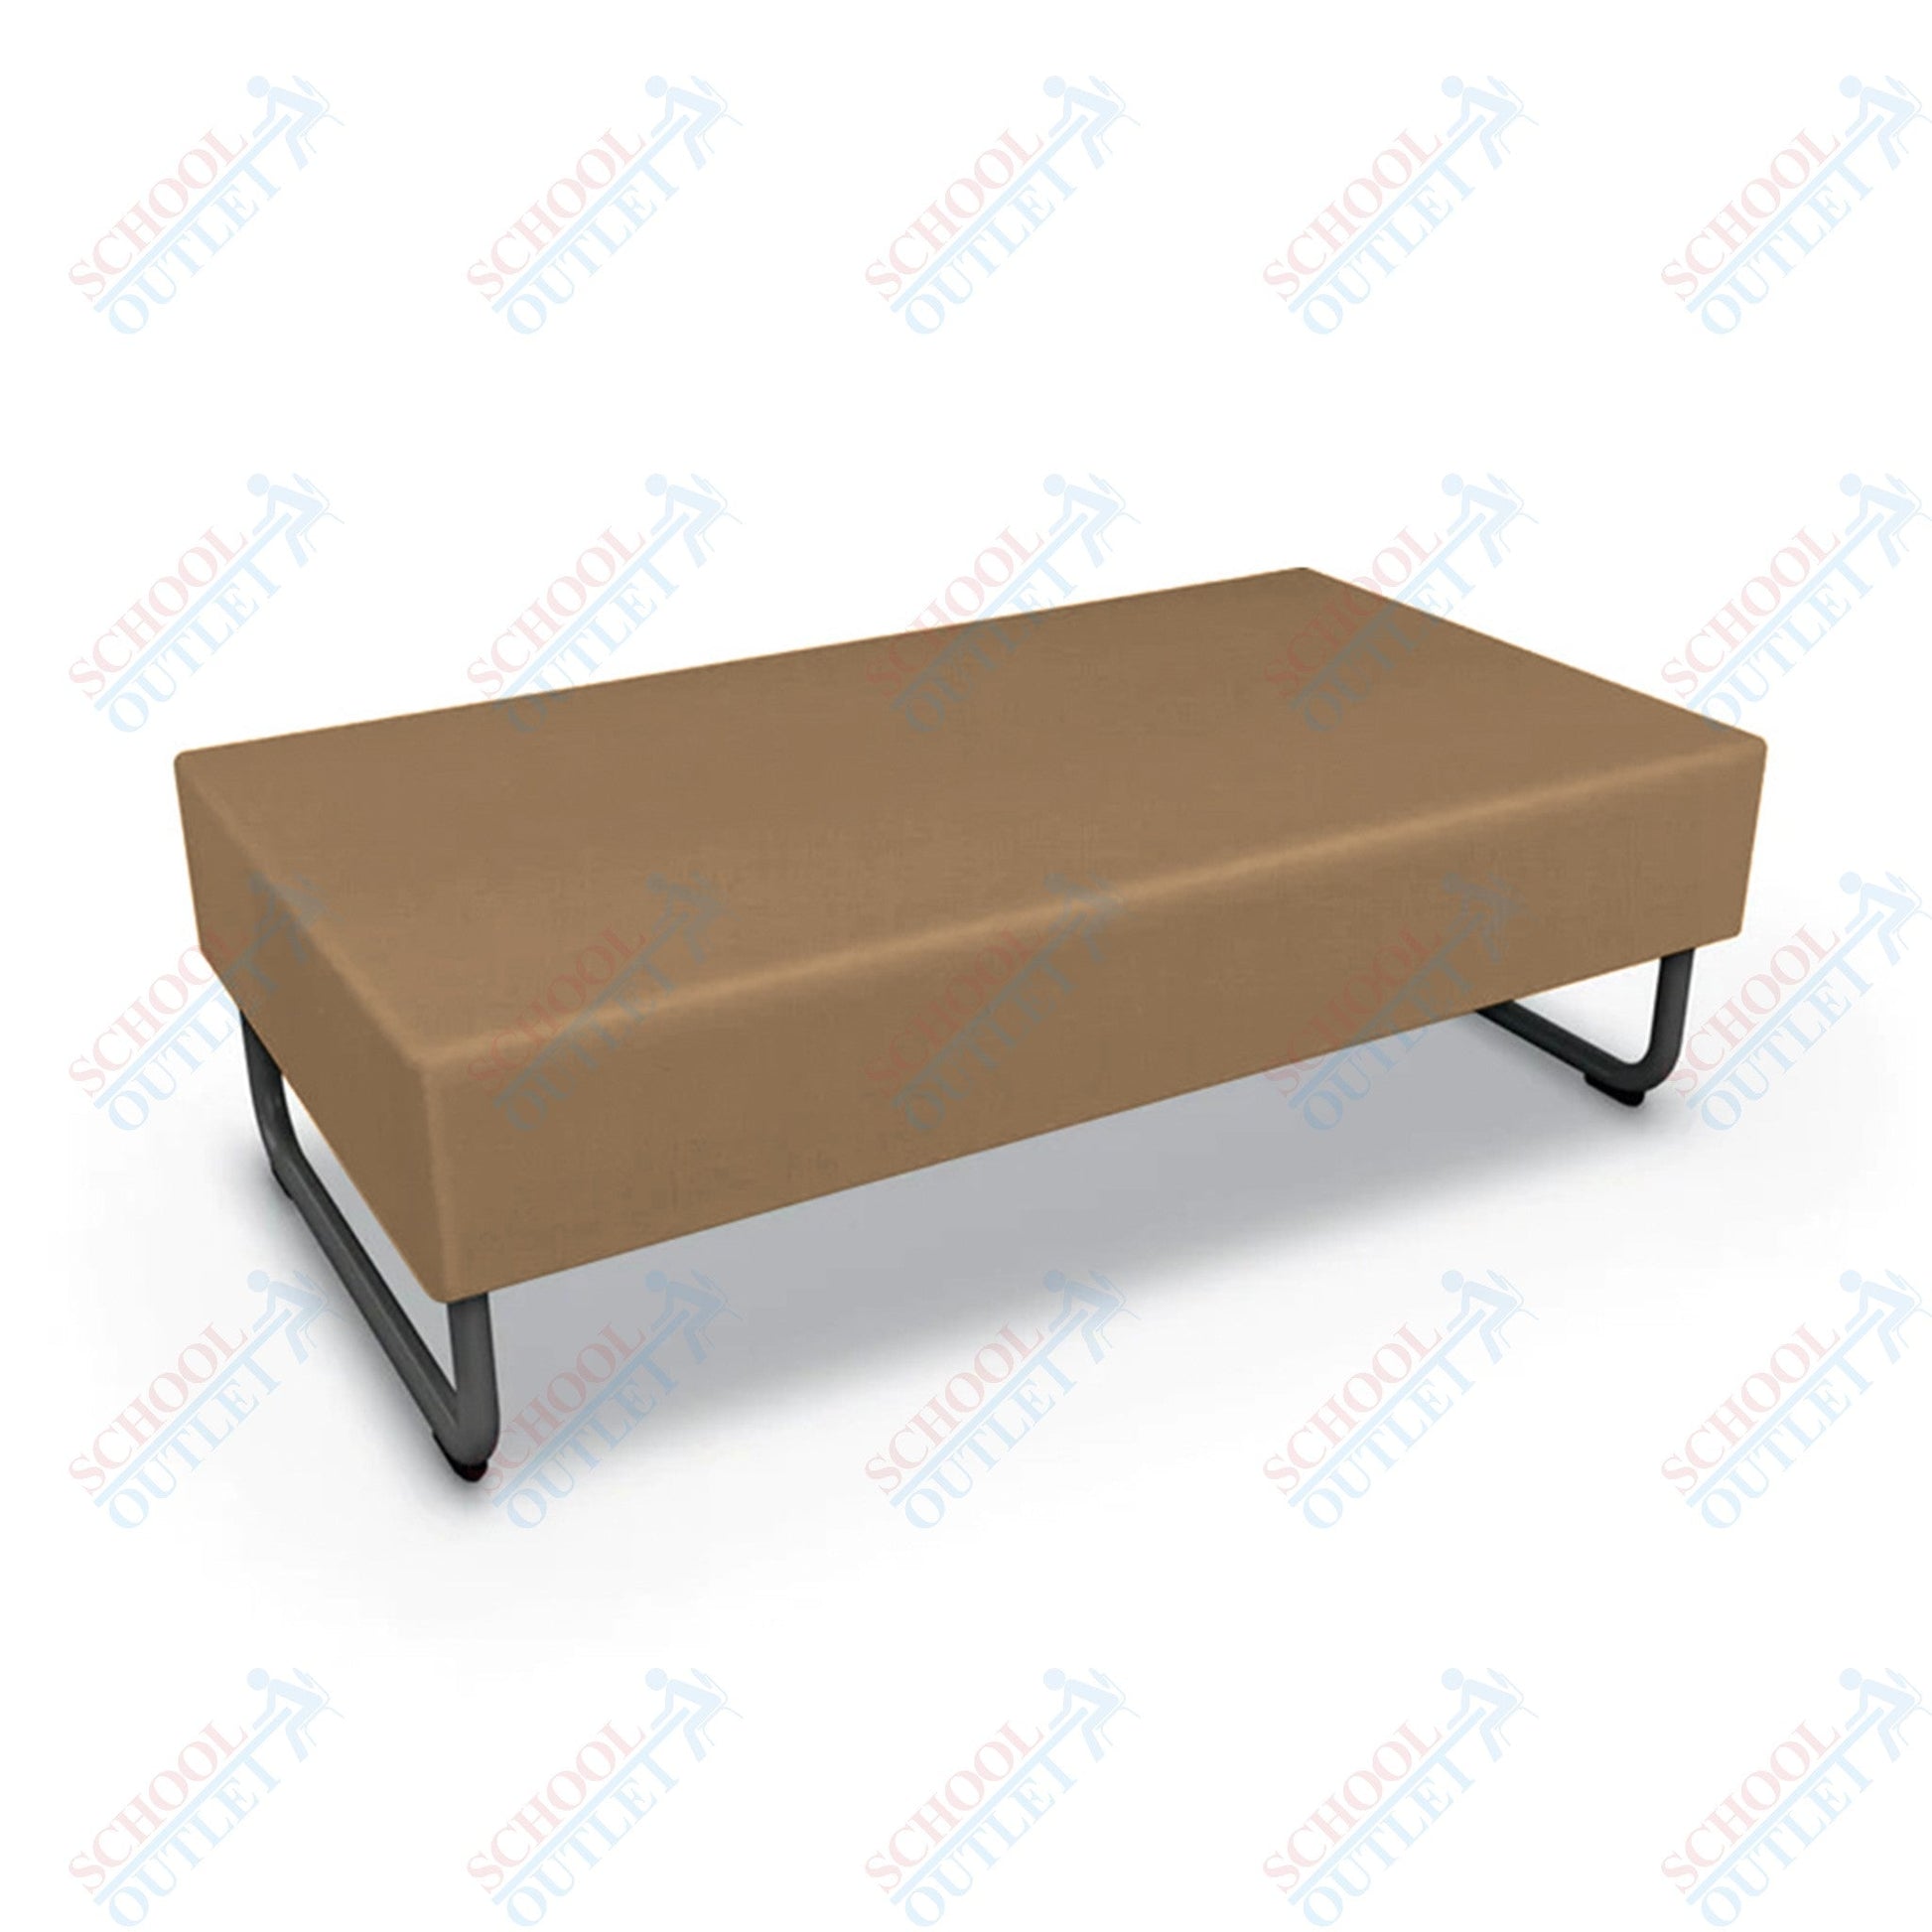 Mooreco Akt Soft Seating Lounge Loveseat Bench - Grade 02 Fabric and Powder Coated Sled Legs - SchoolOutlet